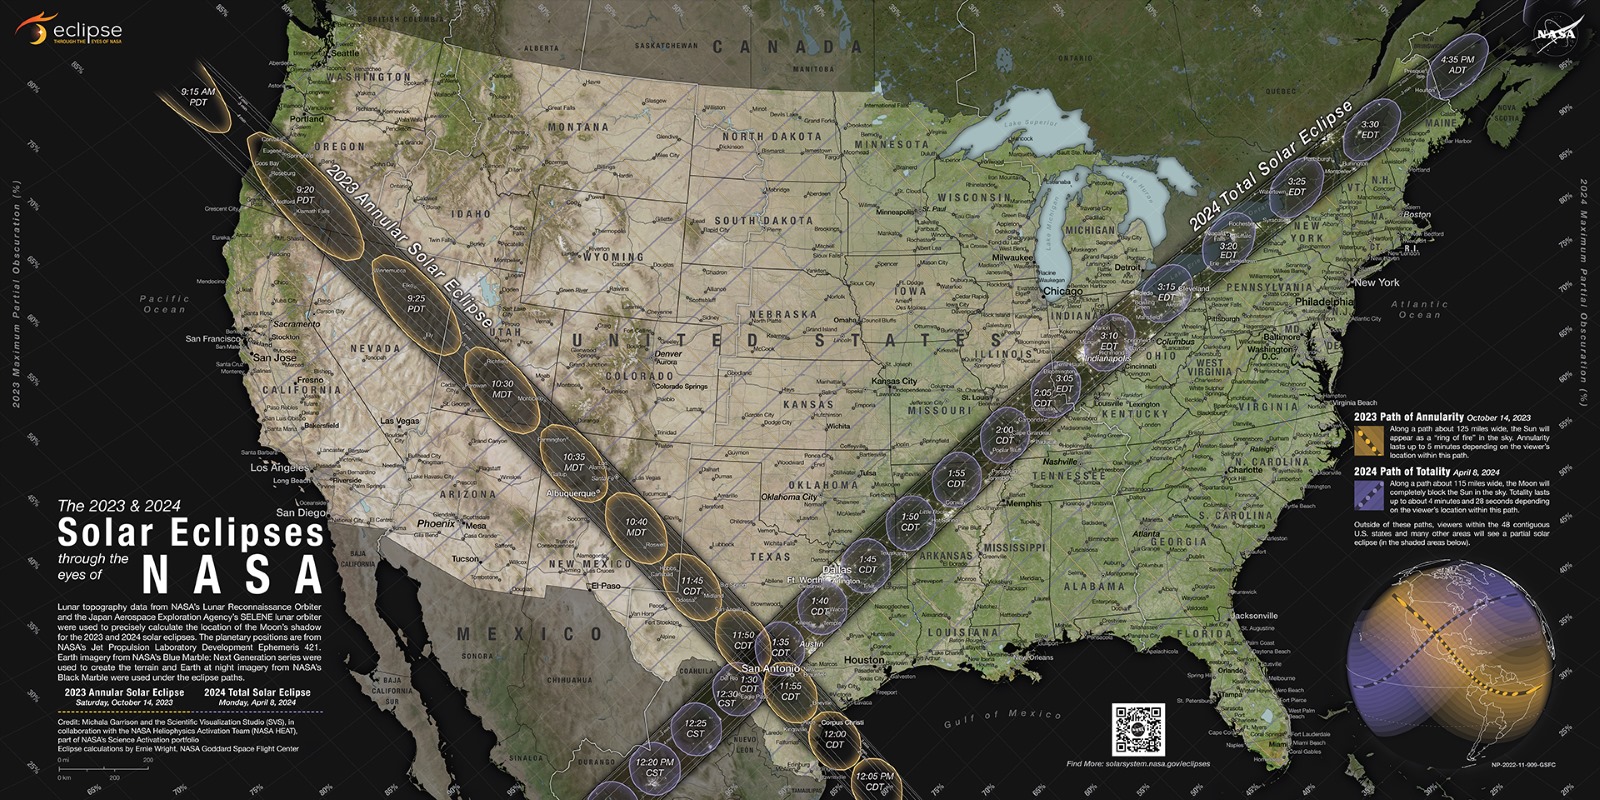 A visualization map from NASA showing the 2023 annular and 2024 total eclipse paths.